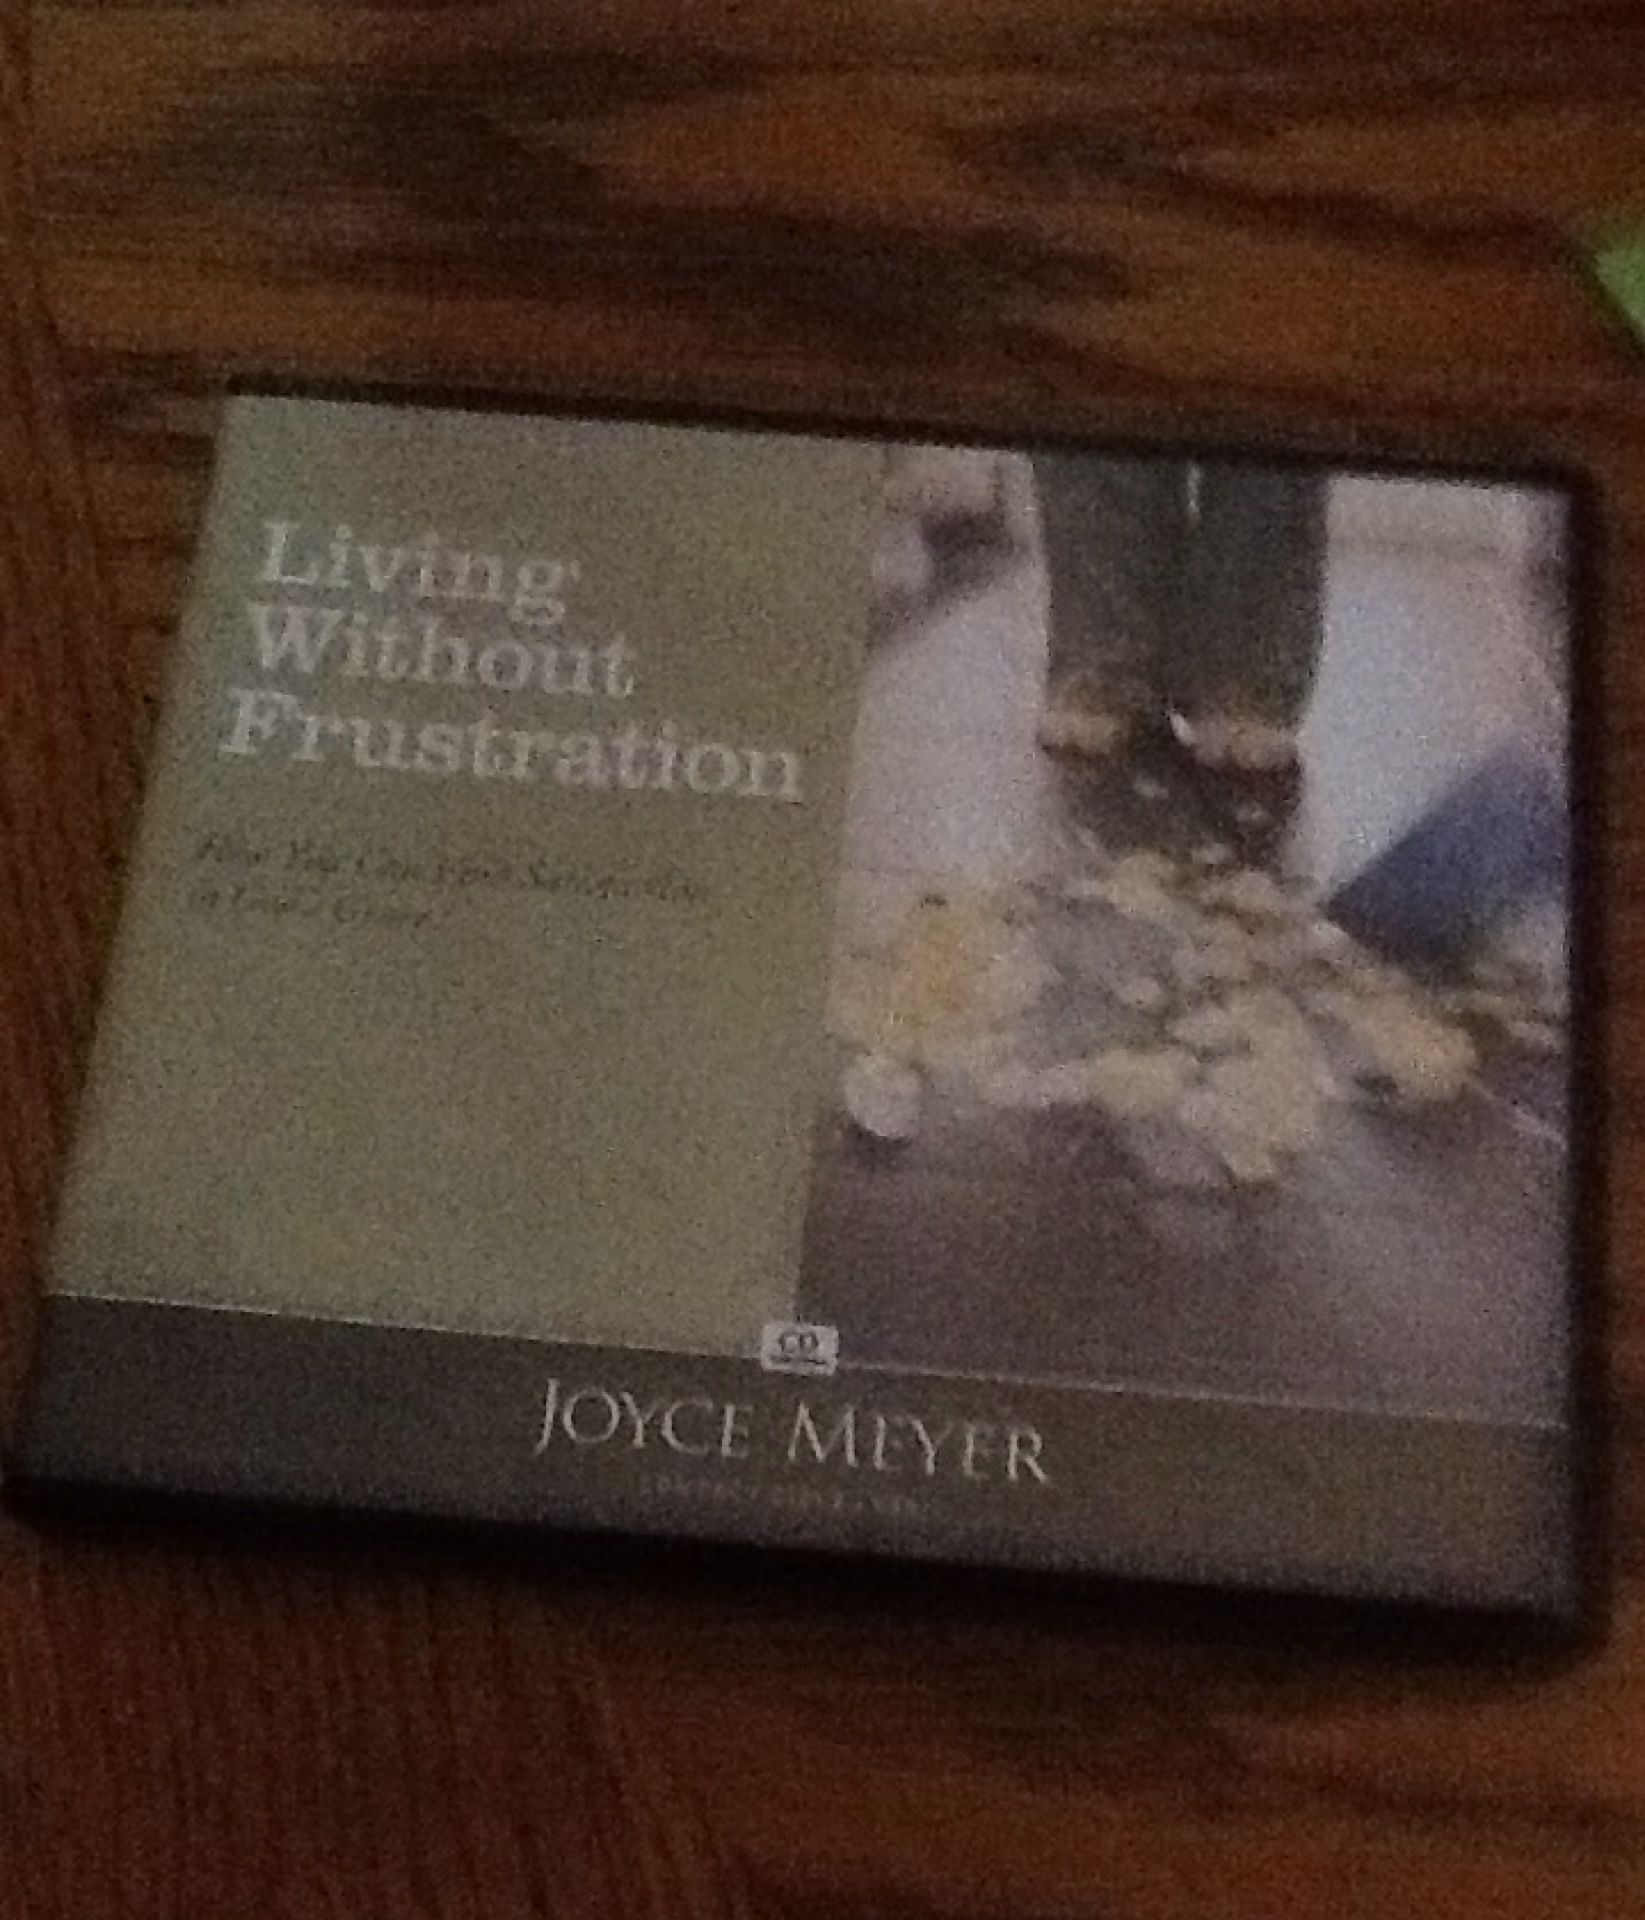 Living without frustration audio book